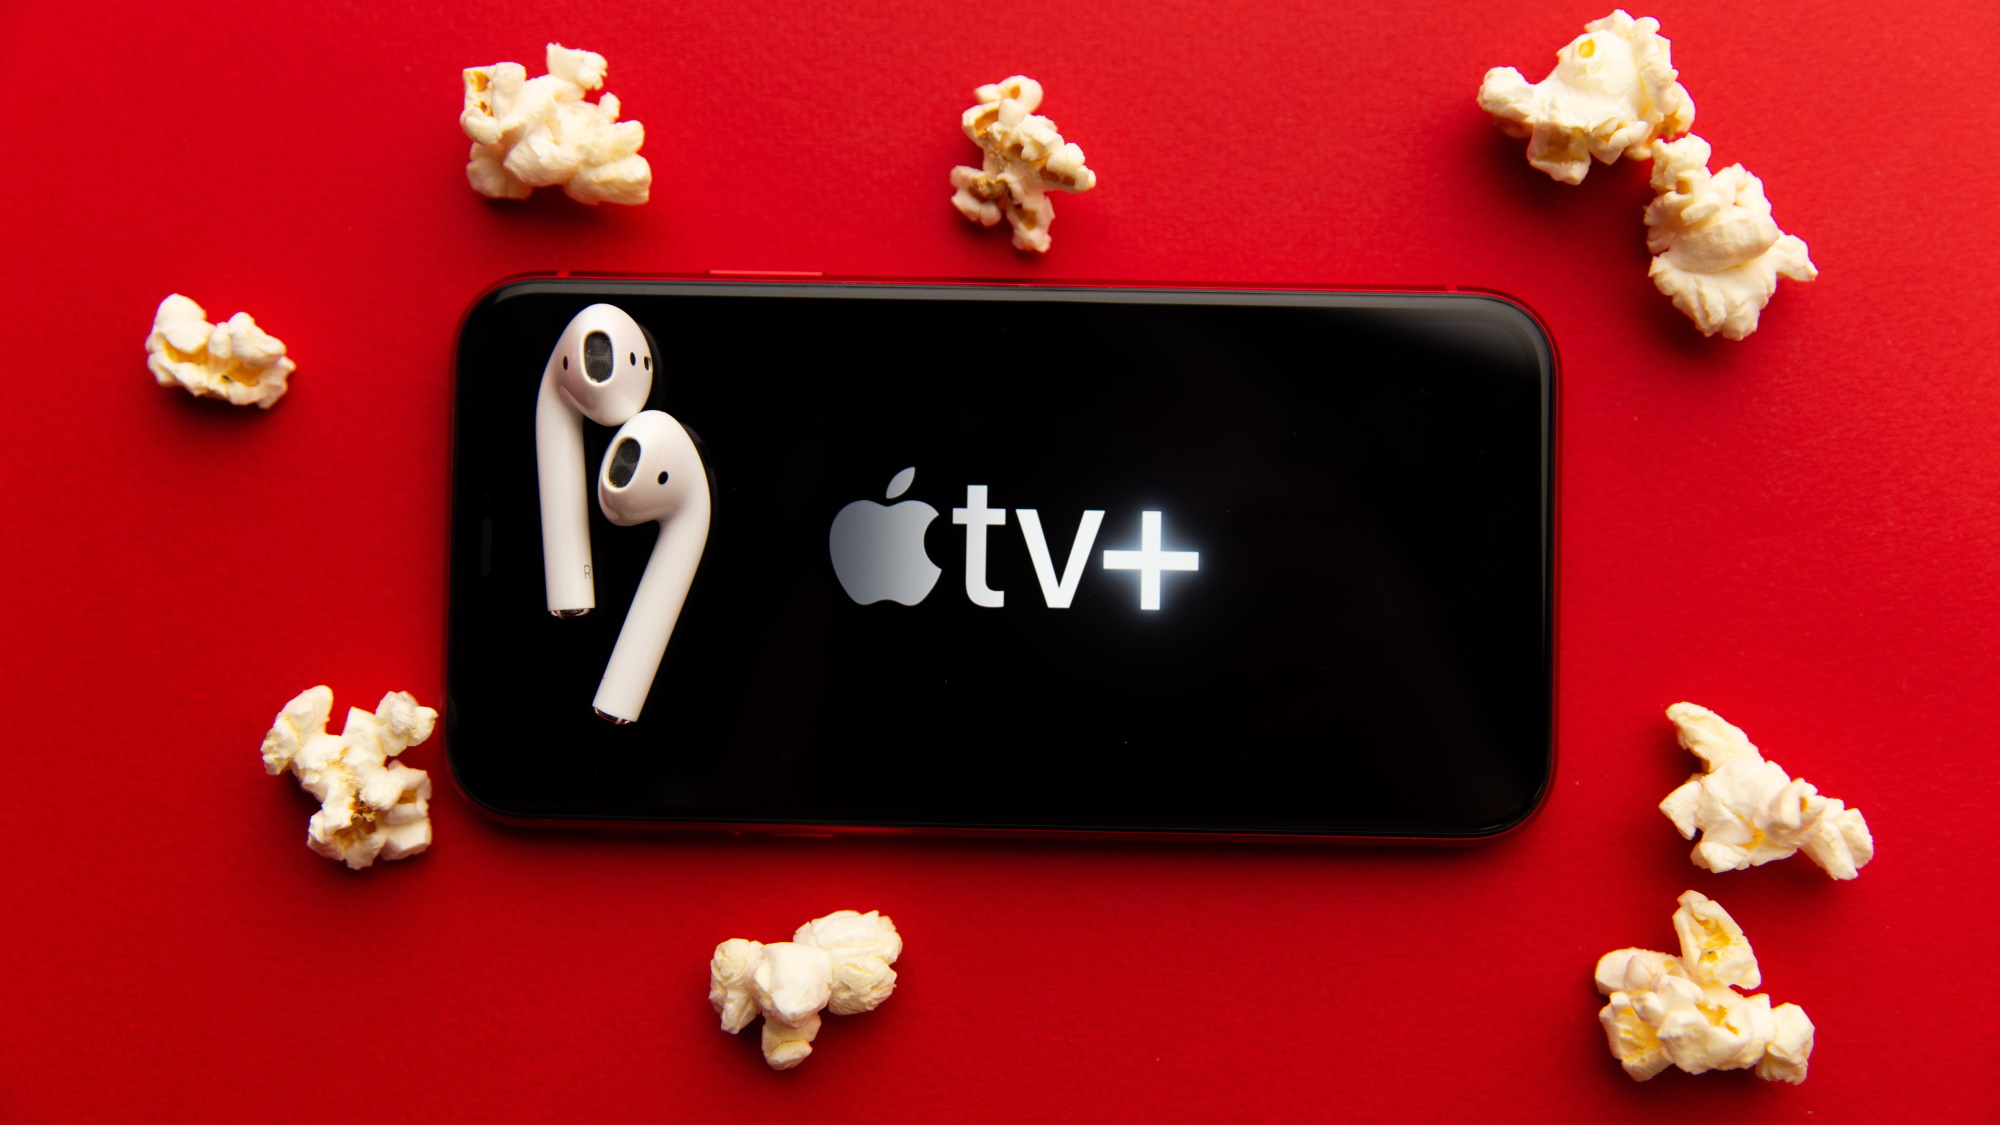 Prime Video on Apple TV: Here's everything you can watch